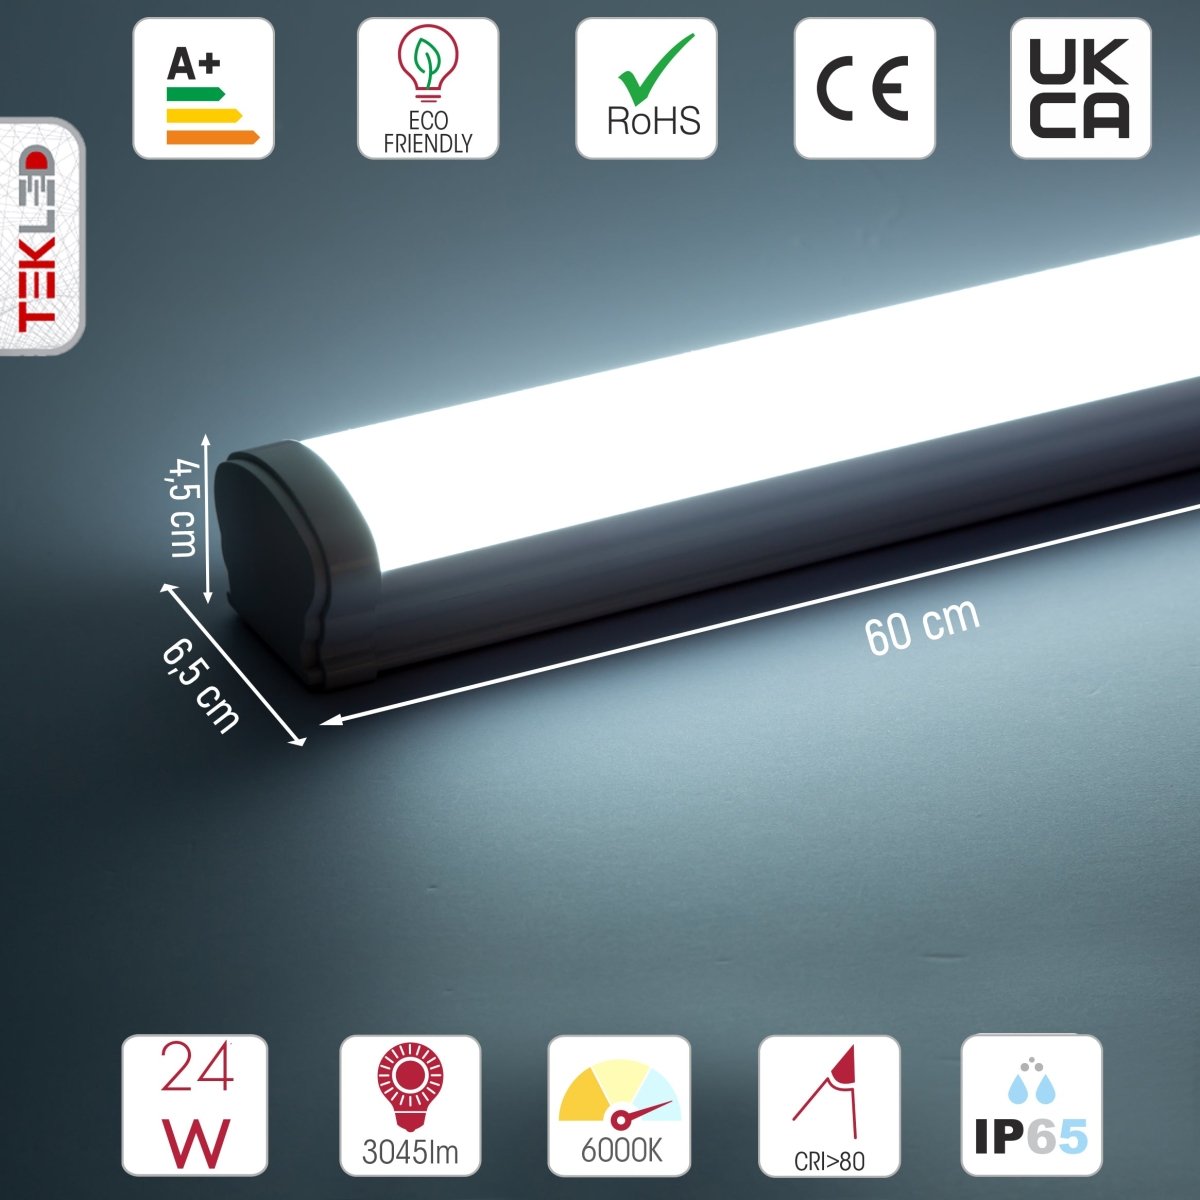 Technical specs and measurements for LED Tri-proof Batten Linear Fitting 24W 6500K Cool Daylight IP65 60cm 2ft